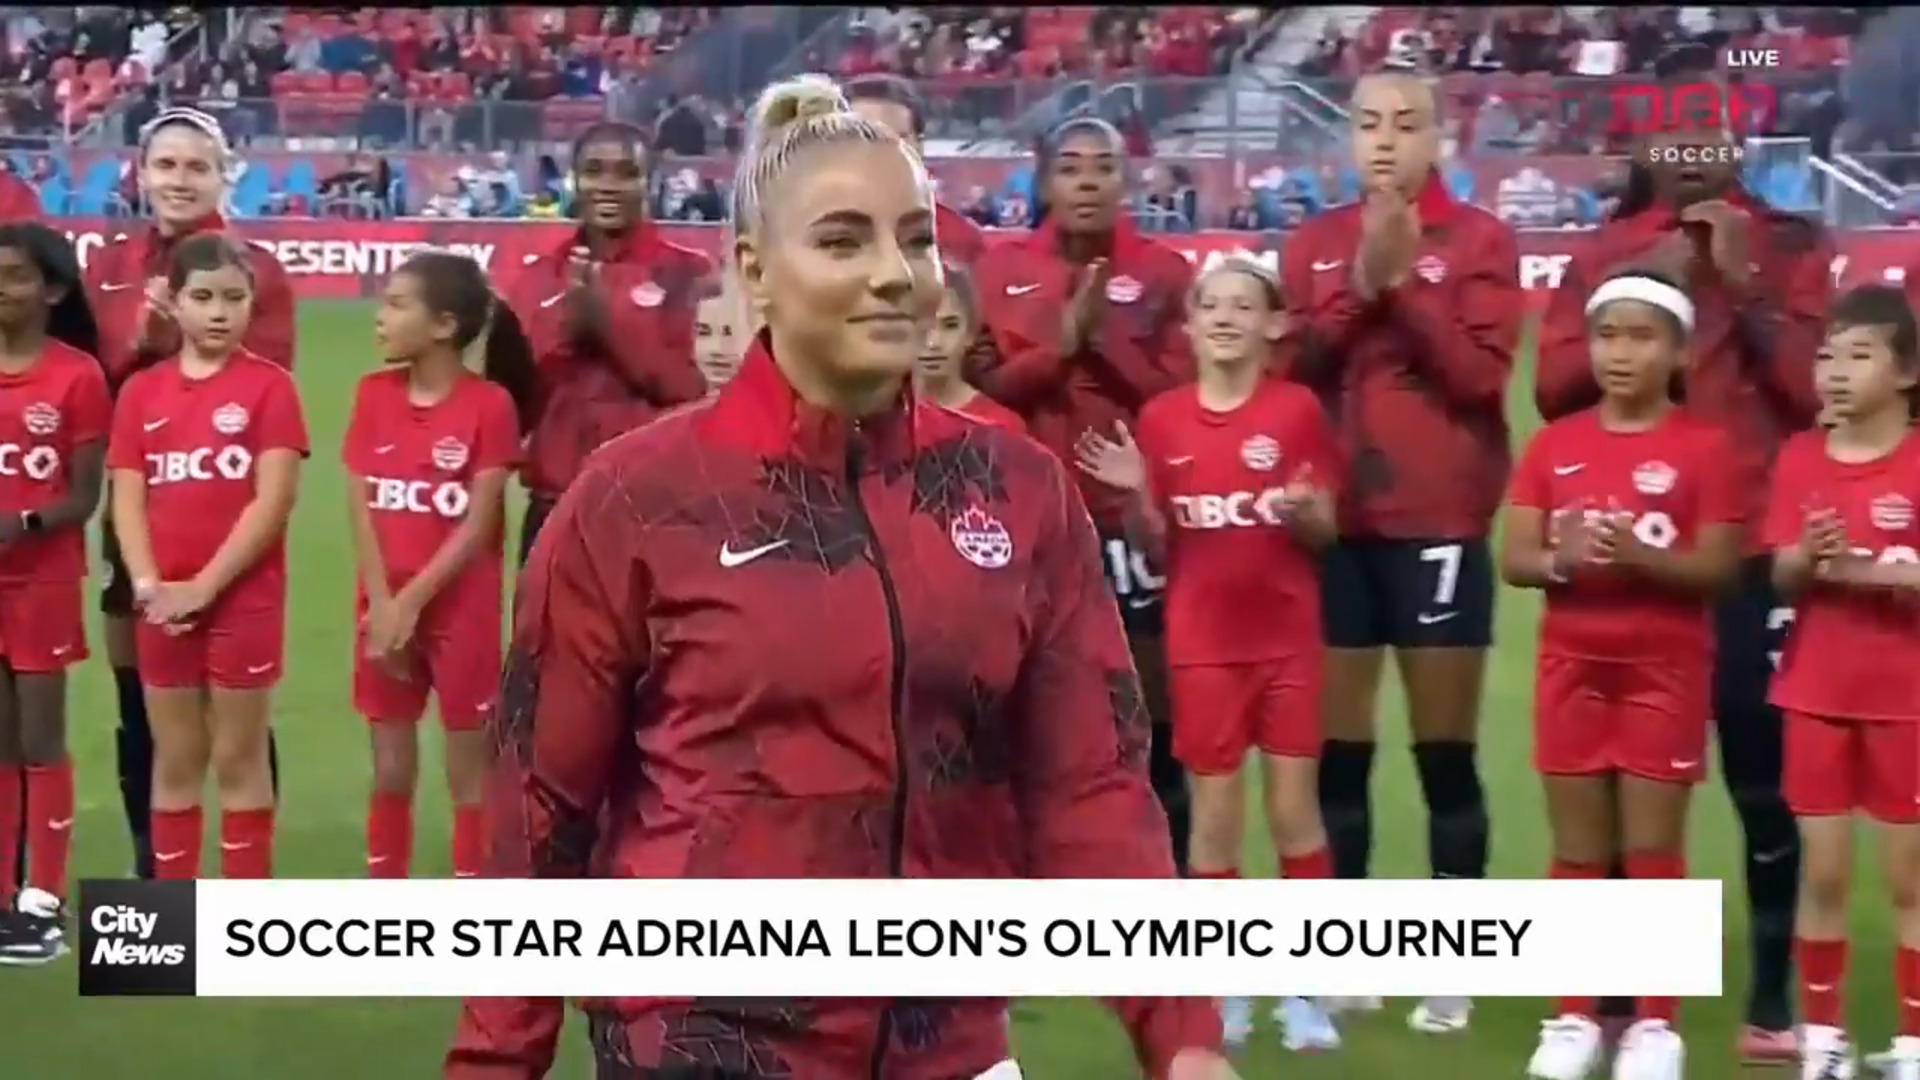 Canadian soccer star Adriana Leon's journey to the Olympic stage